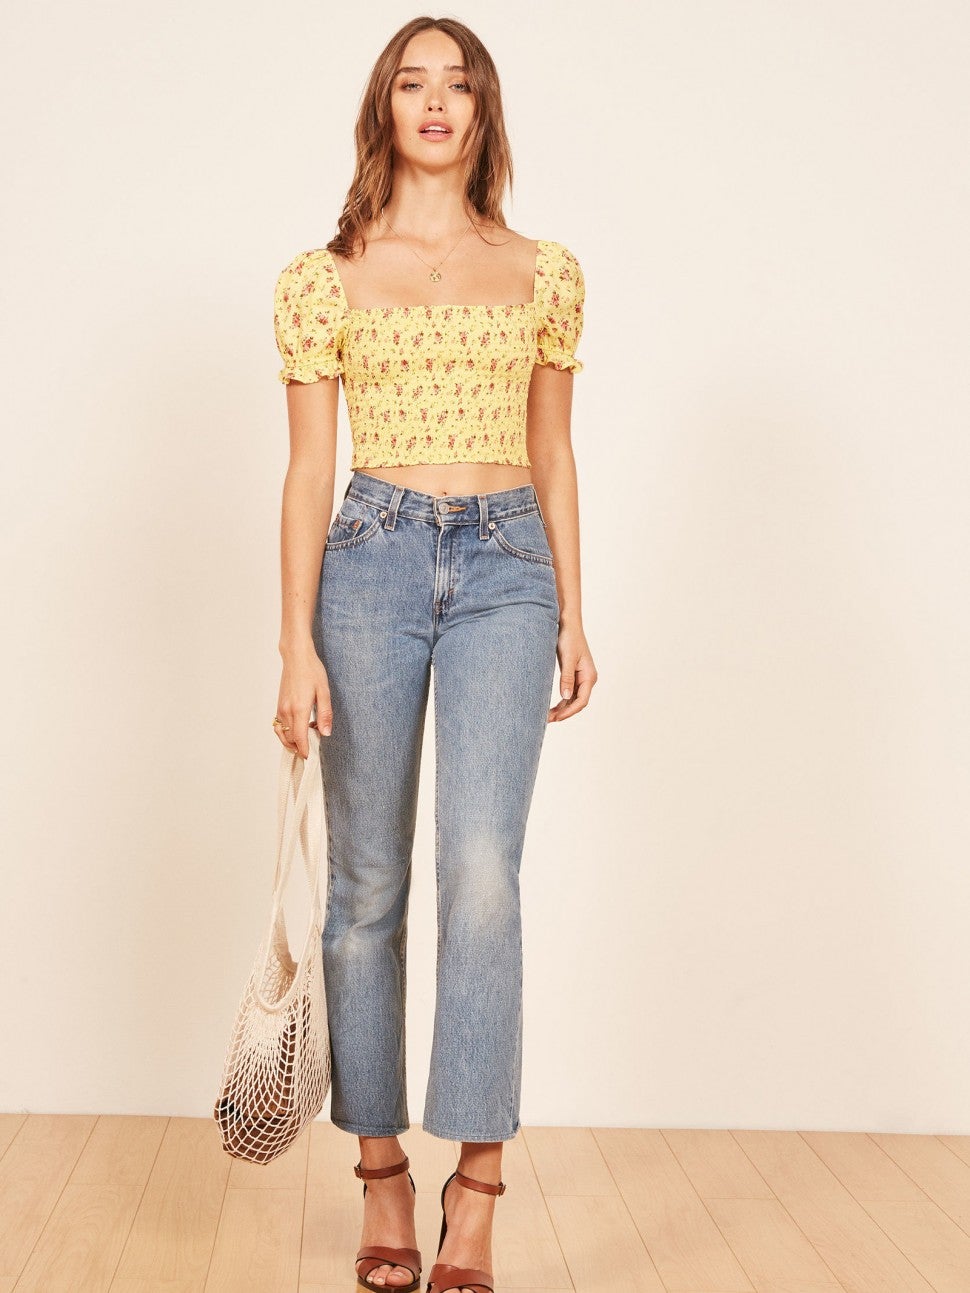 Reformation yellow floral puffy shoulder top